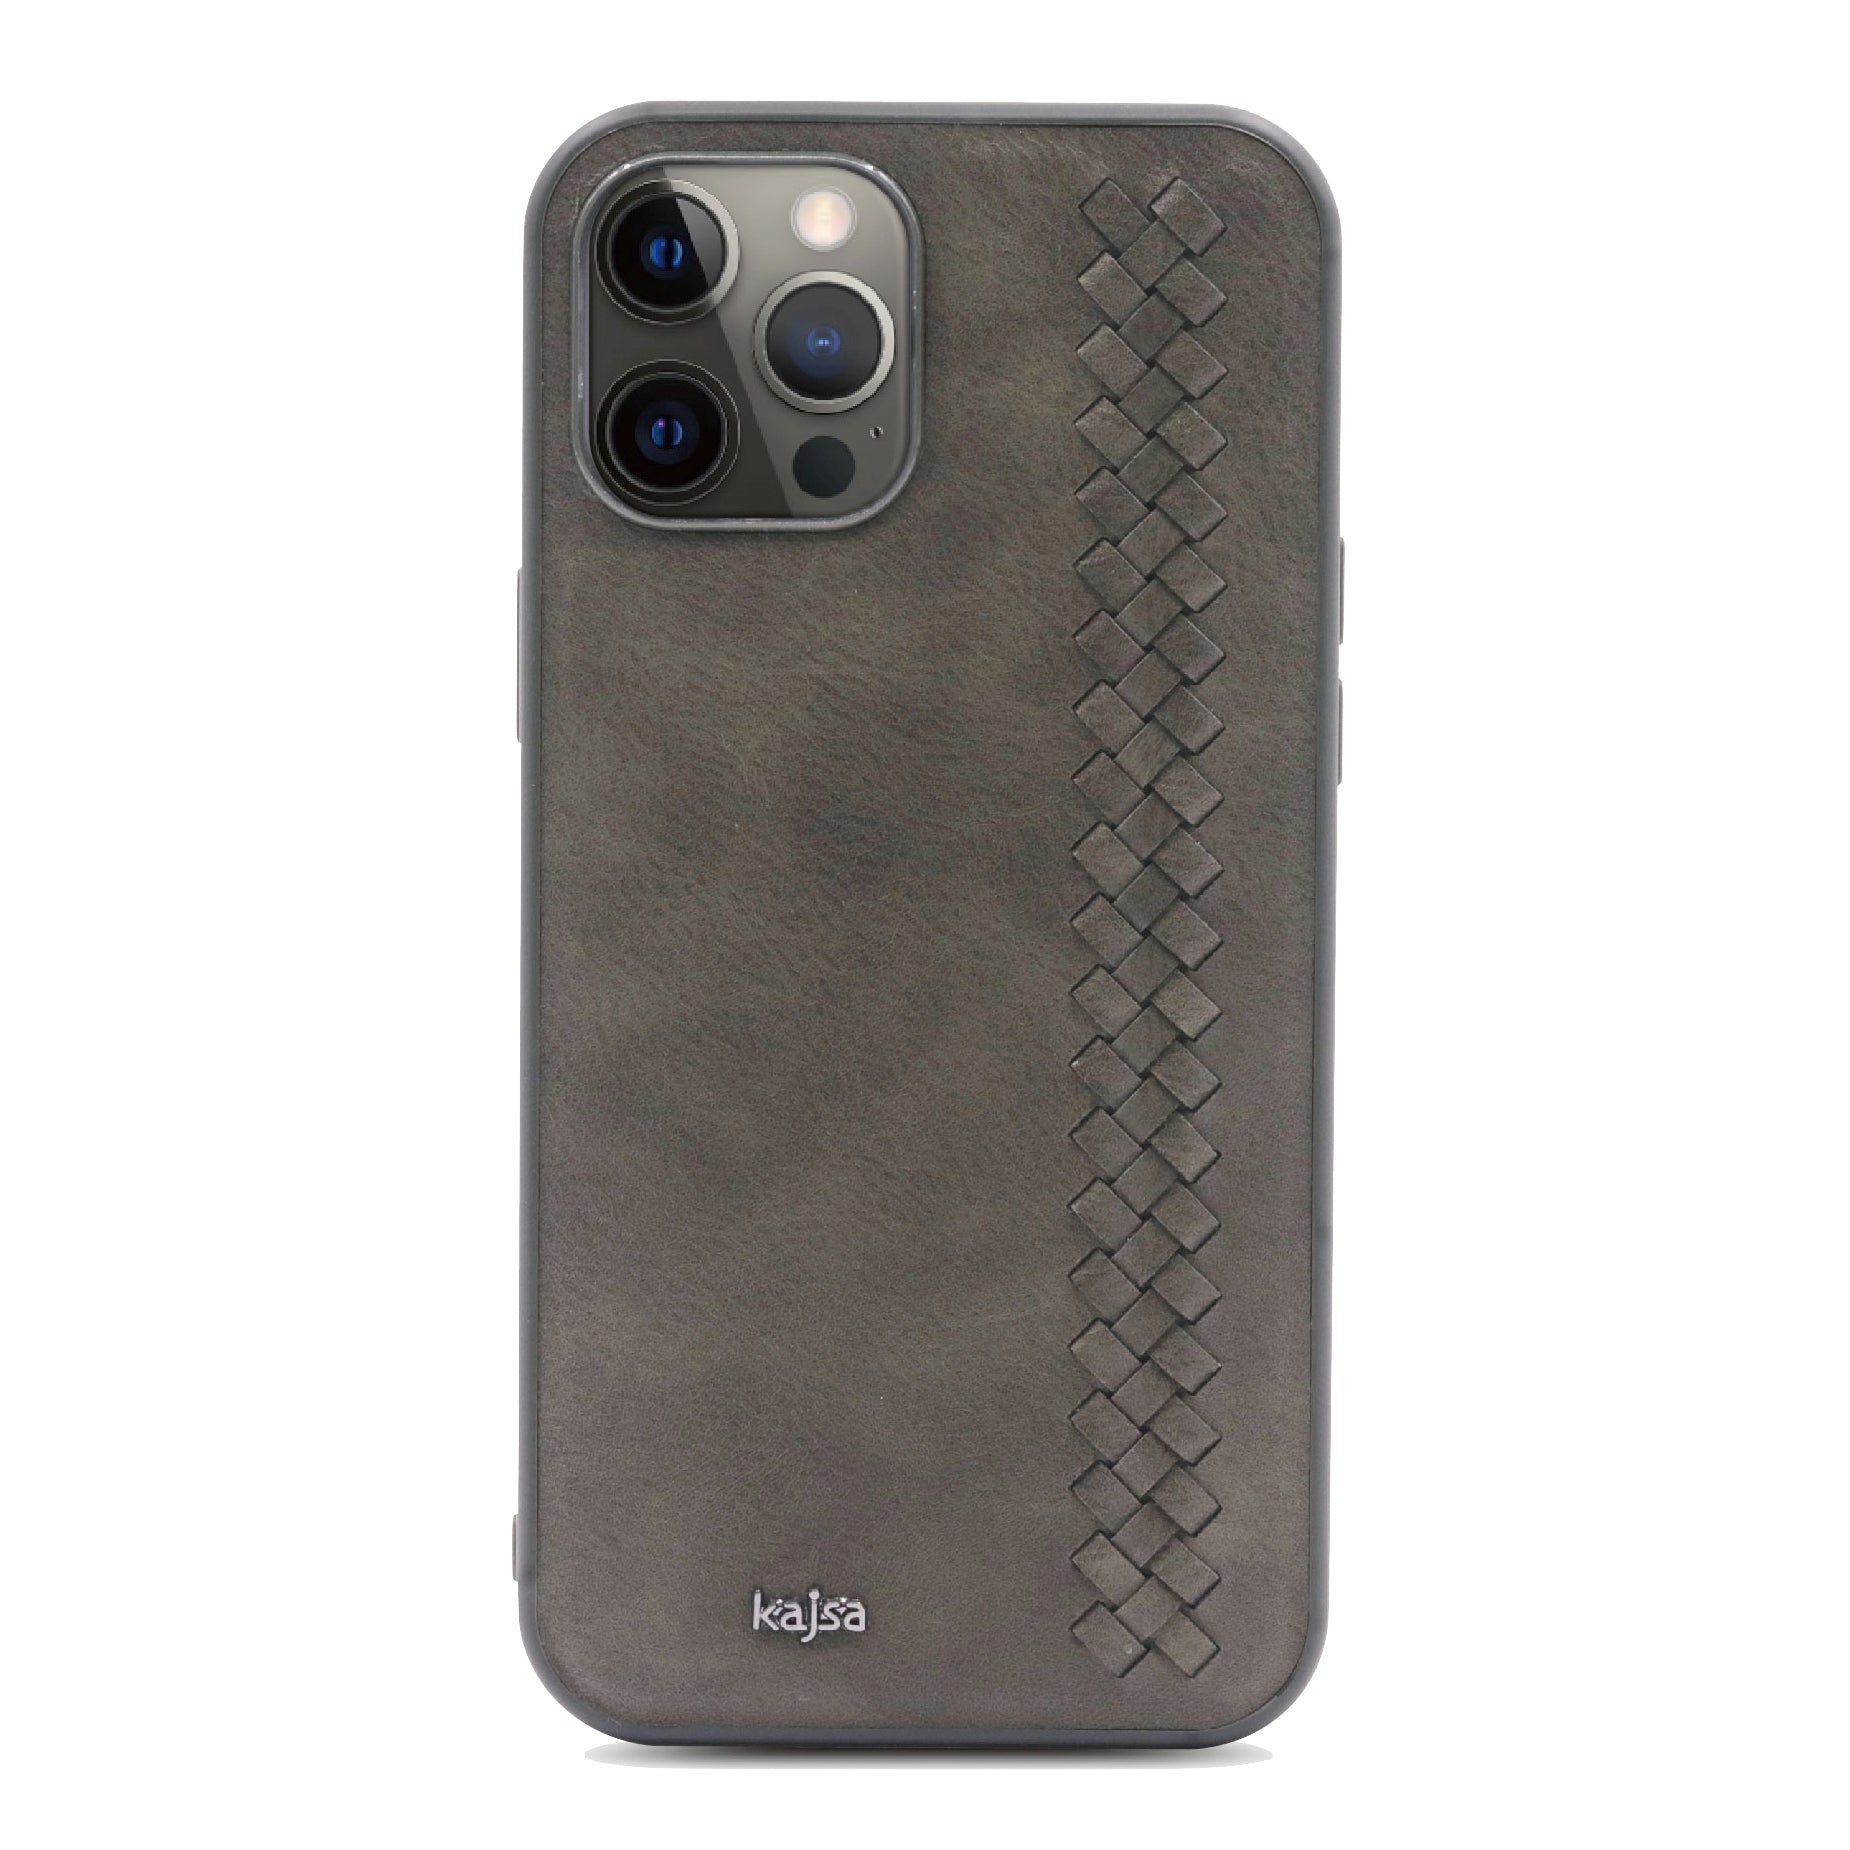 Preppie Collection - Vertical Weave Back Case for iPhone 12-Phone Case- phone case - phone cases- phone cover- iphone cover- iphone case- iphone cases- leather case- leather cases- DIYCASE - custom case - leather cover - hand strap case - croco pattern case - snake pattern case - carbon fiber phone case - phone case brand - unique phone case - high quality - phone case brand - protective case - buy phone case hong kong - online buy phone case - iphone‎手機殼 - 客製化手機殼 - samsung ‎手機殼 - 香港手機殼 - 買電話殼